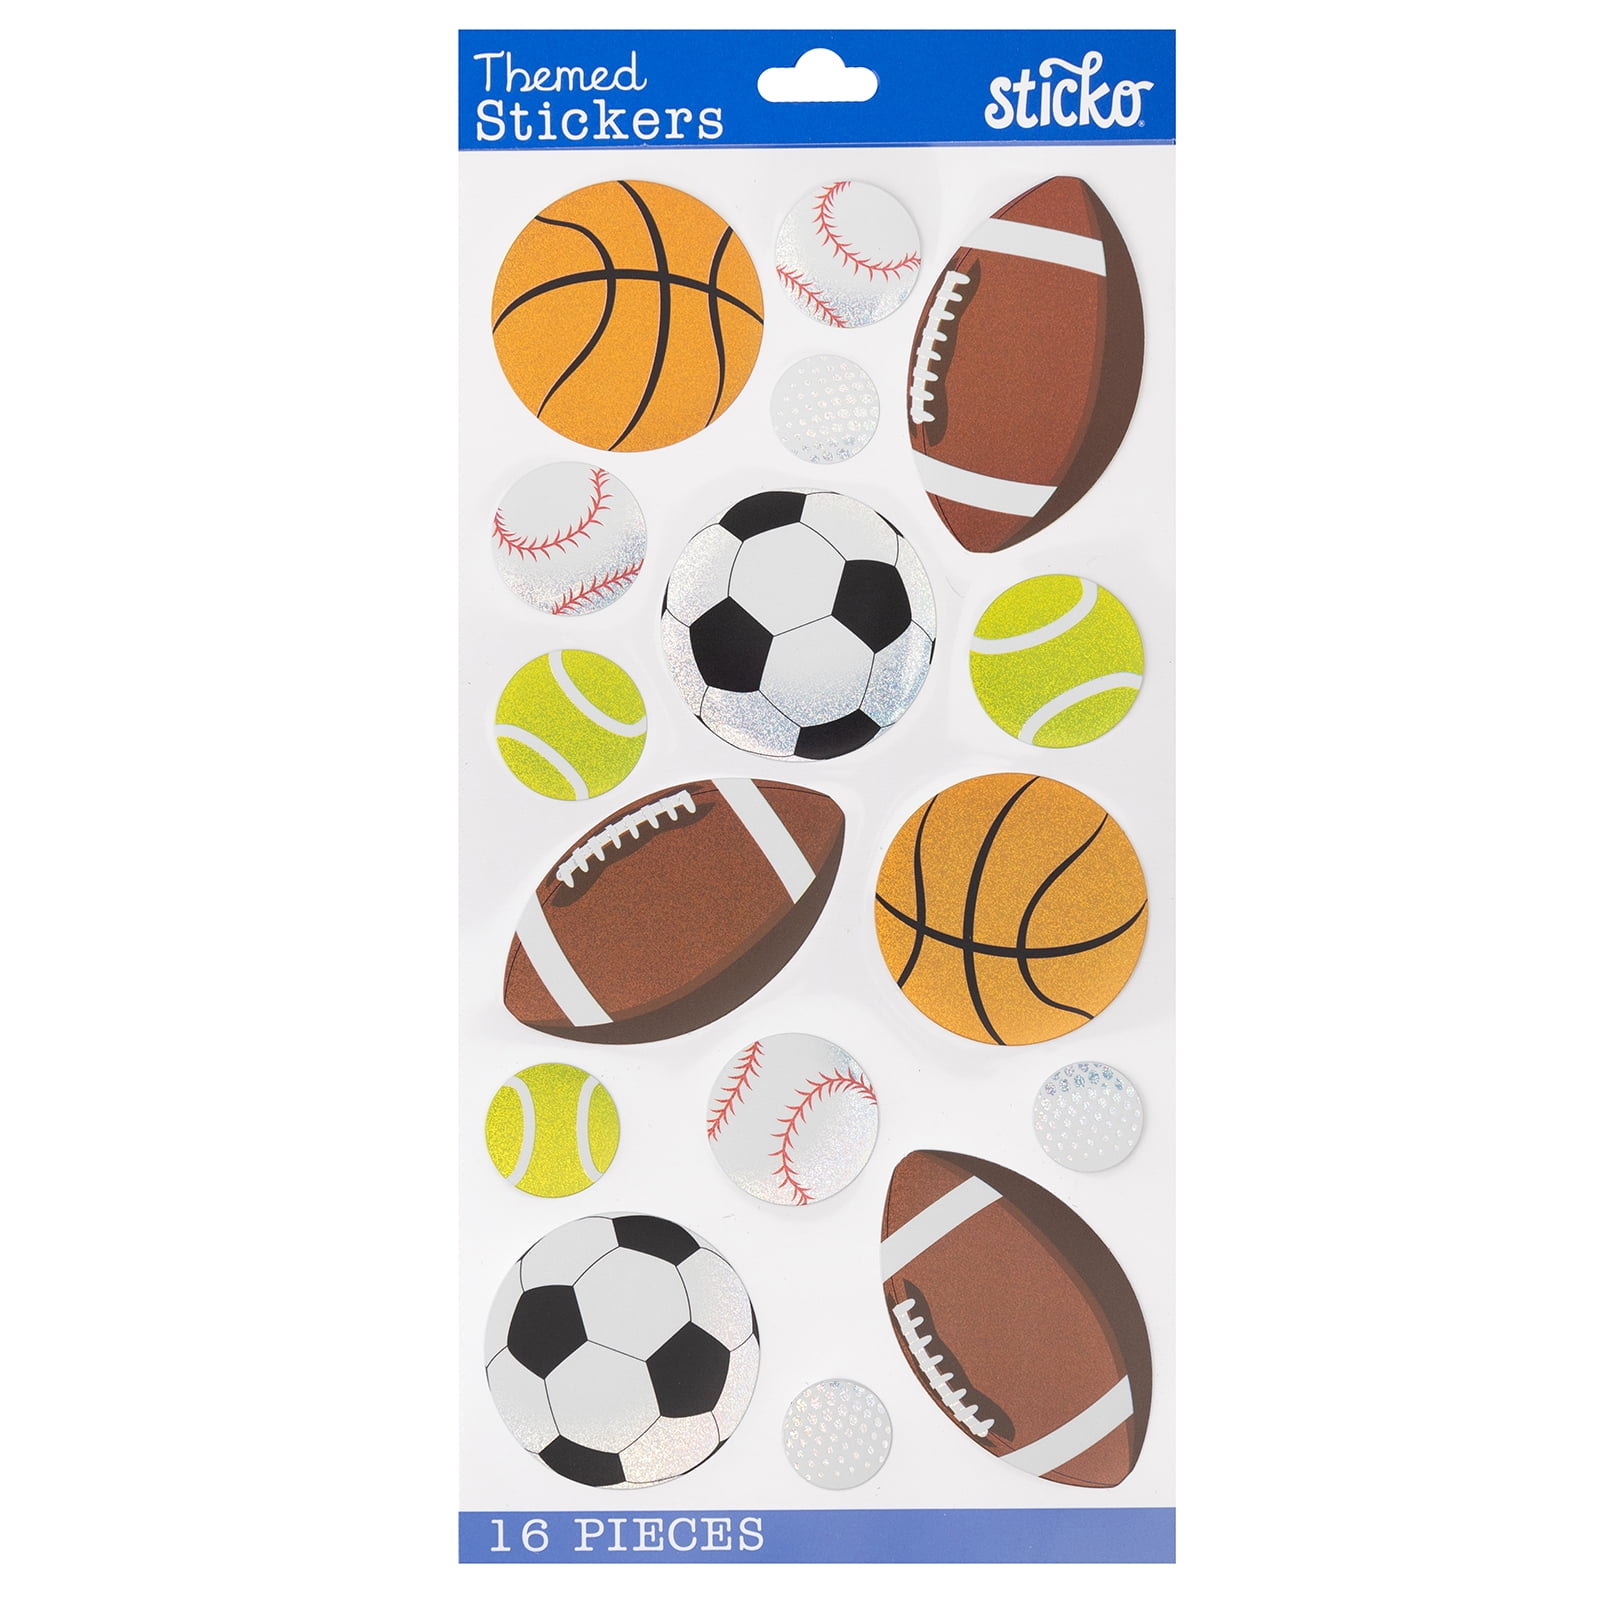 0.5 Inch 200 Pieces Baseball Football Sports Stickers Mini Scrapbooking Mixed Soccer Basketball Football Sticker Vinyl Ball Stickers Ball Themed Decorations for Scrapbooks Notebooks Birthday Party 